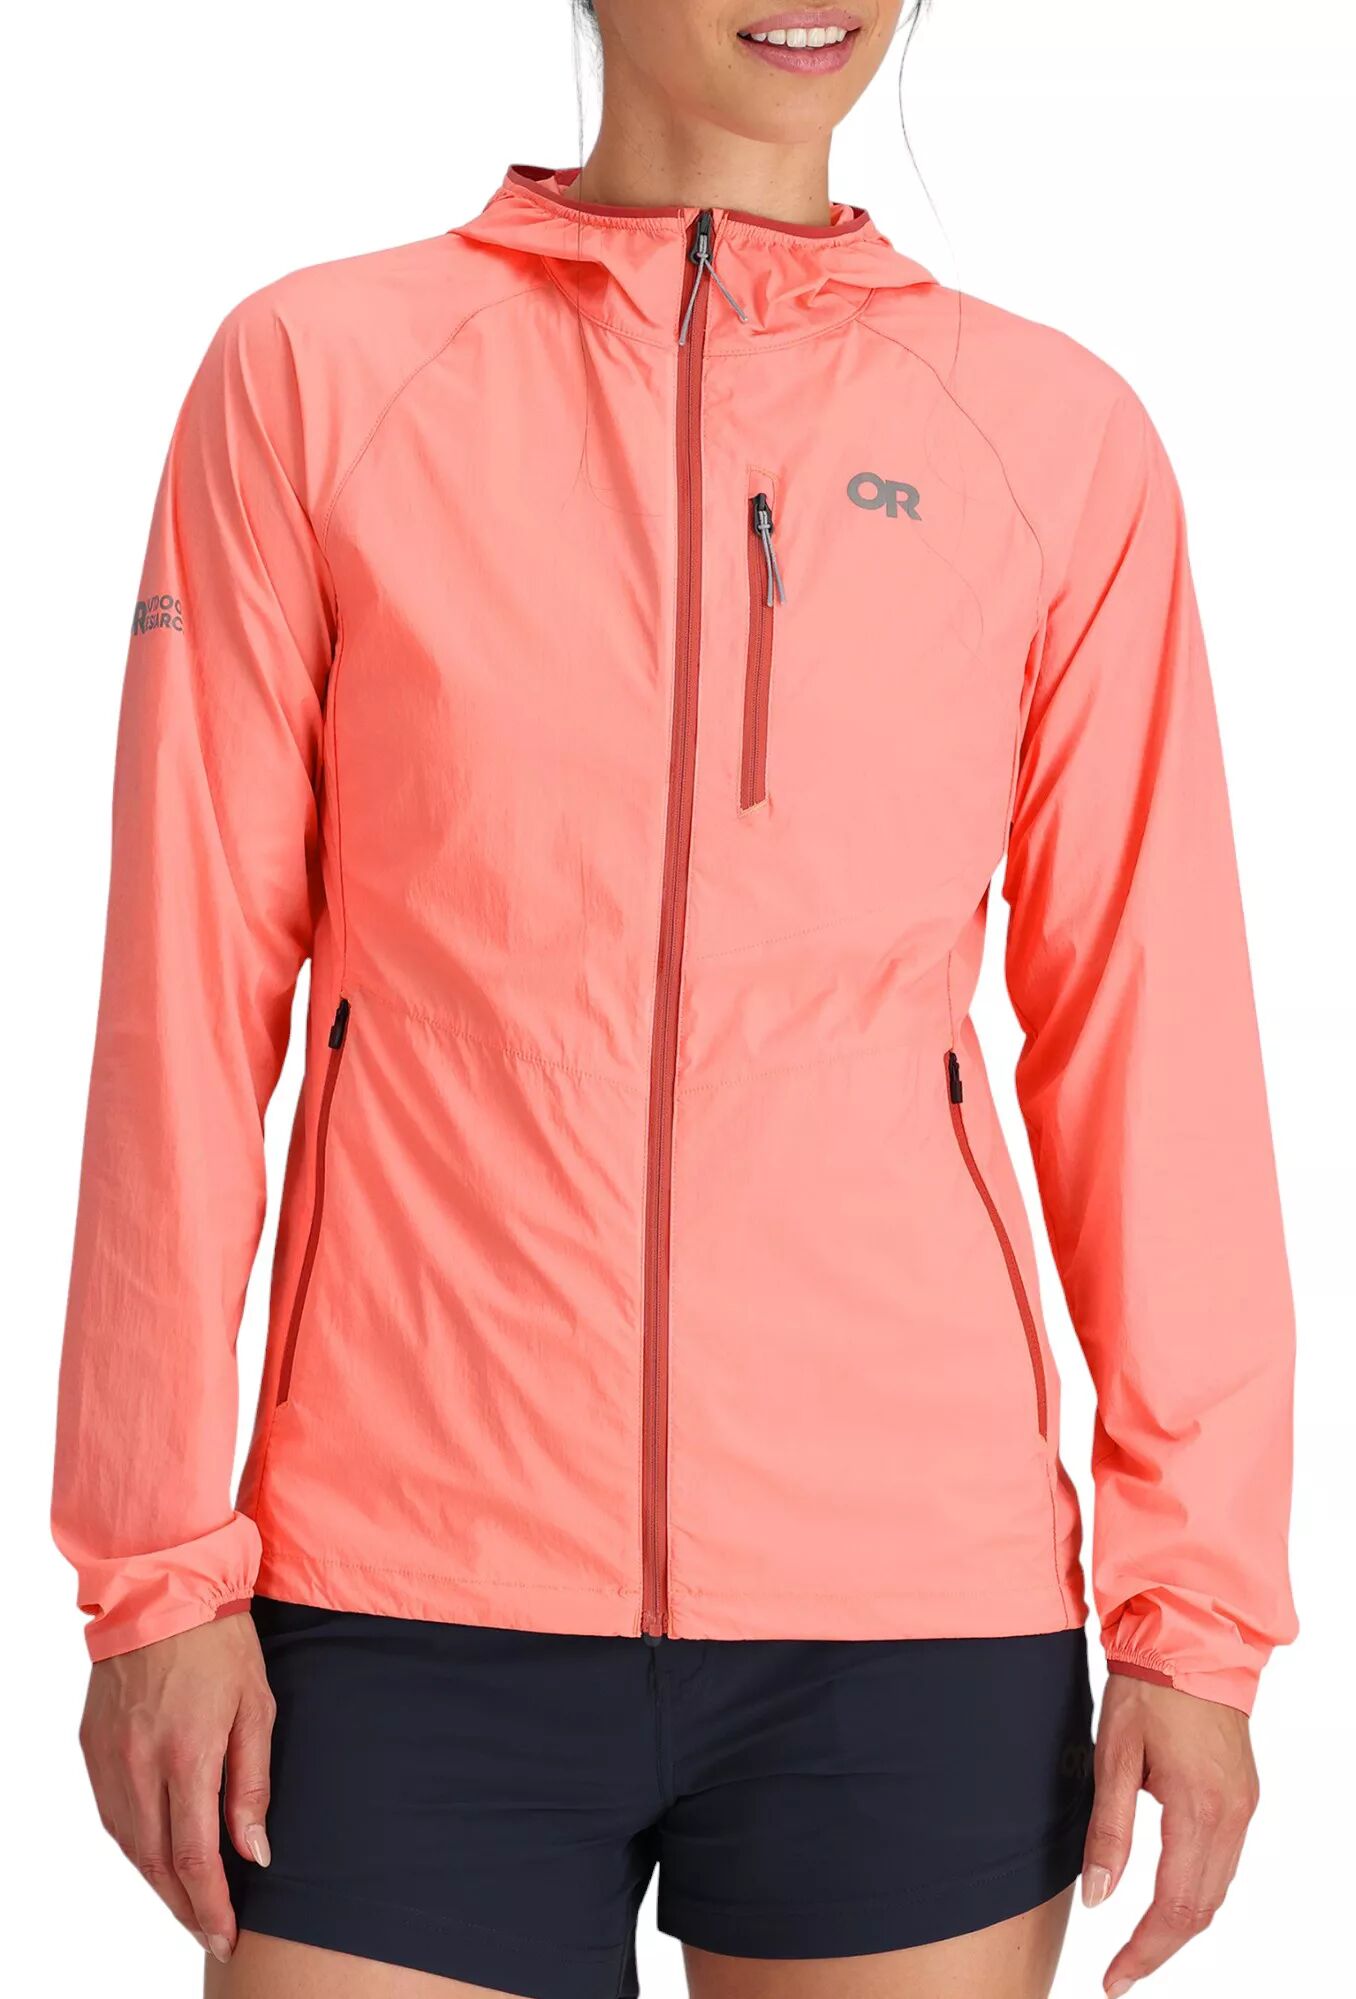 Outdoor Research Women's Shadow Wind Hoodie, Small, Pink